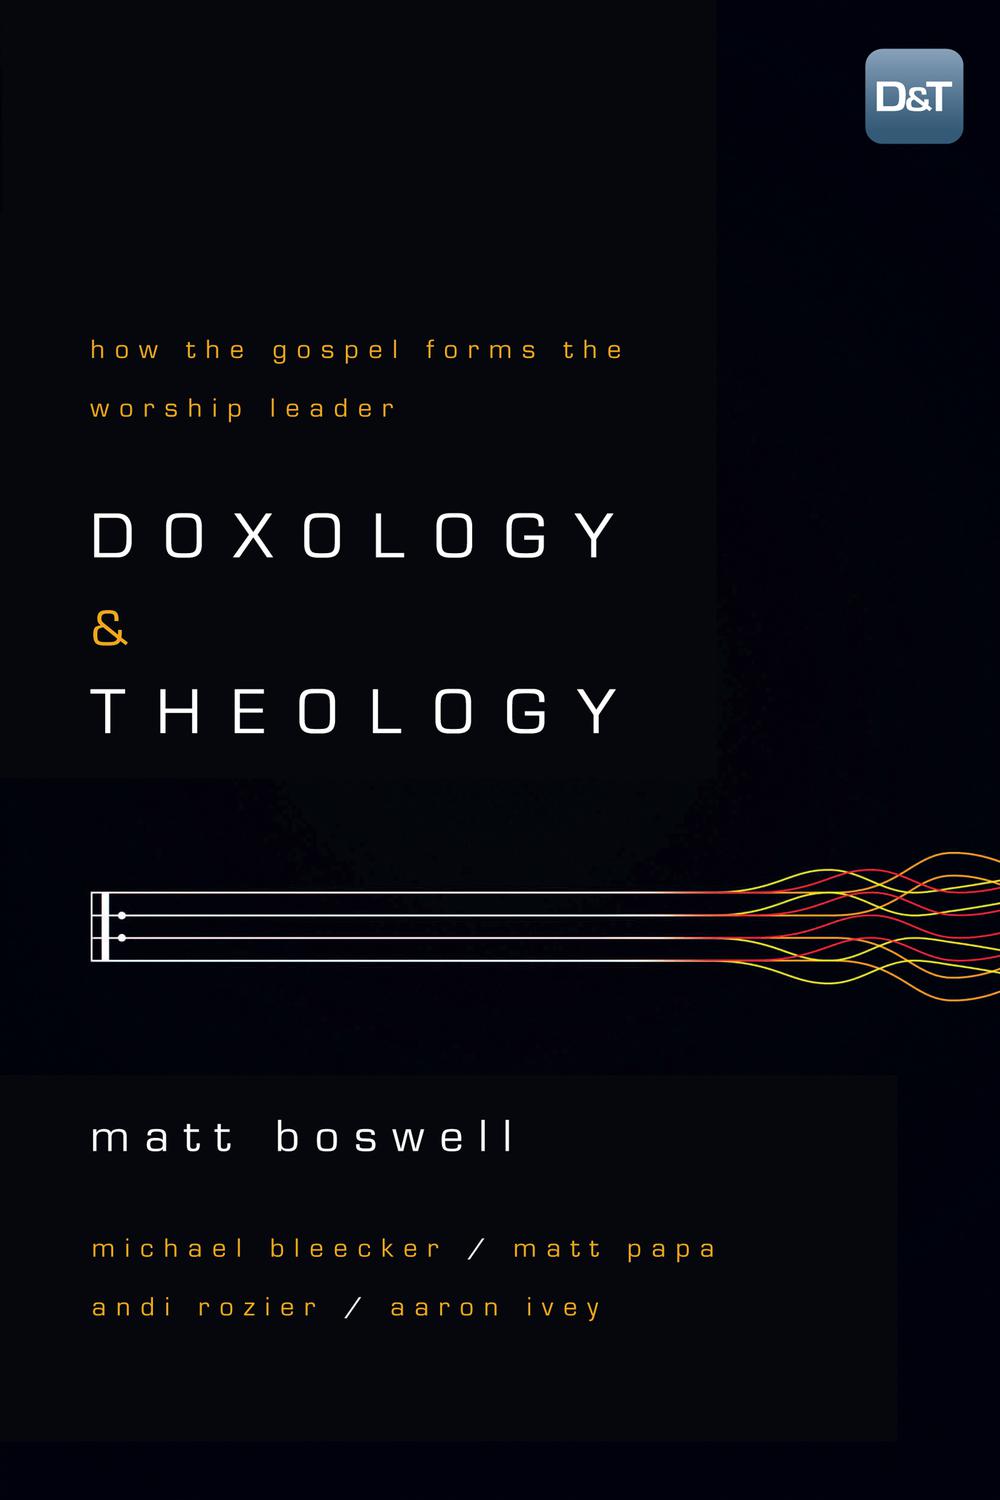 Doxology meaning